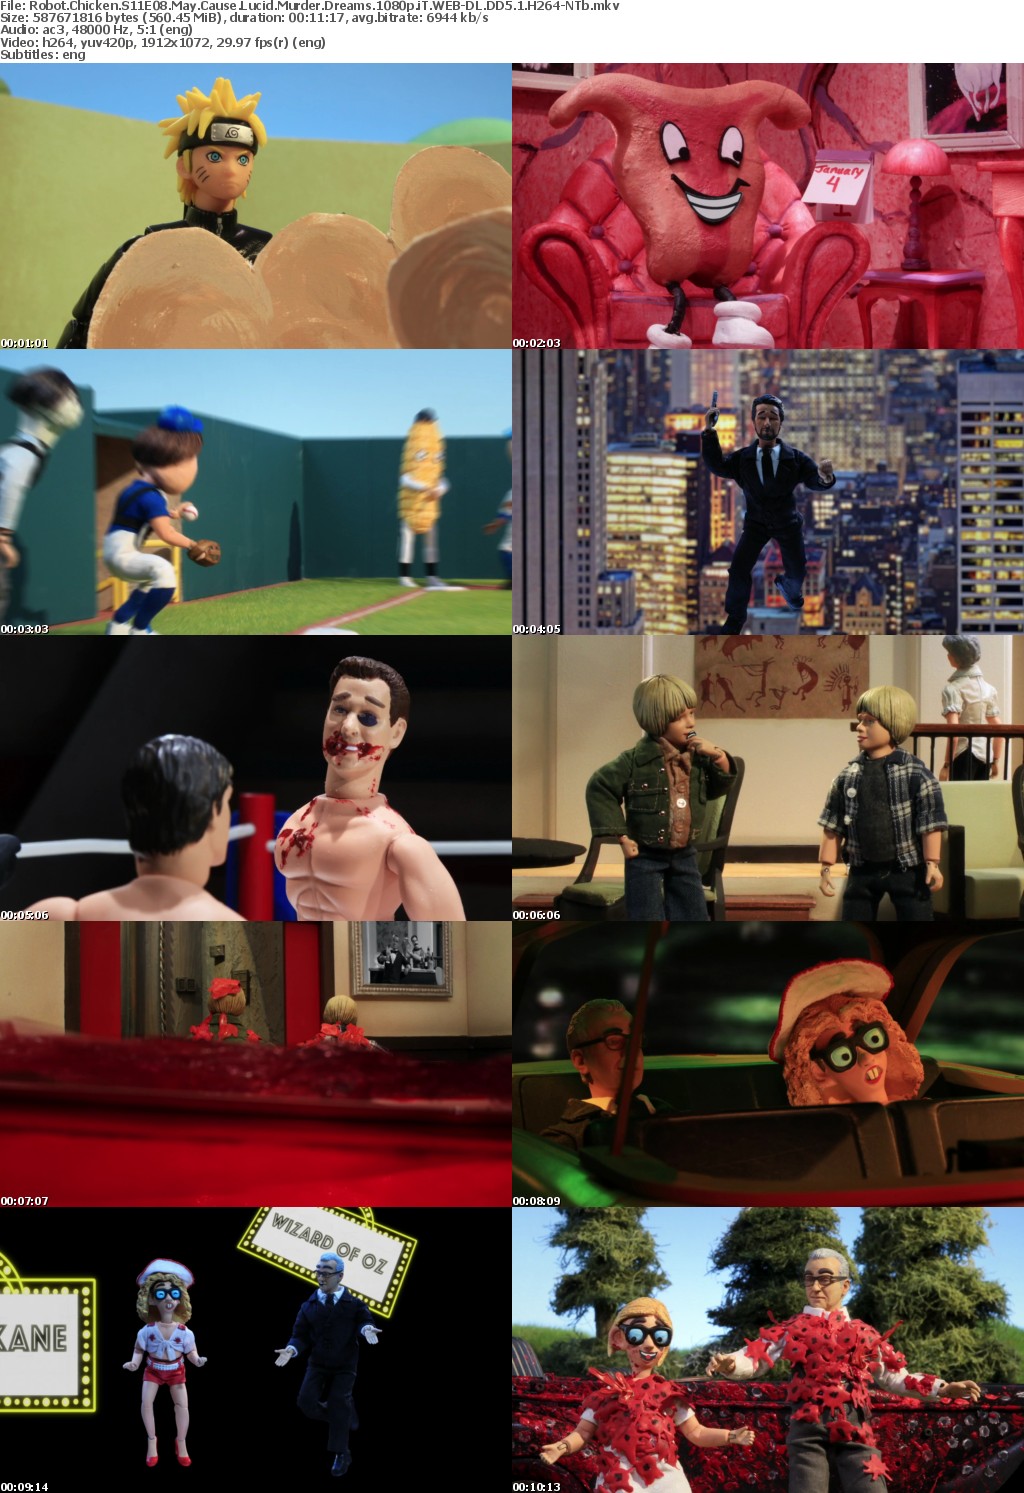 Robot Chicken S11E08 May Cause Lucid Murder Dreams 1080p WEB-DL DD5 1 H264-NTb